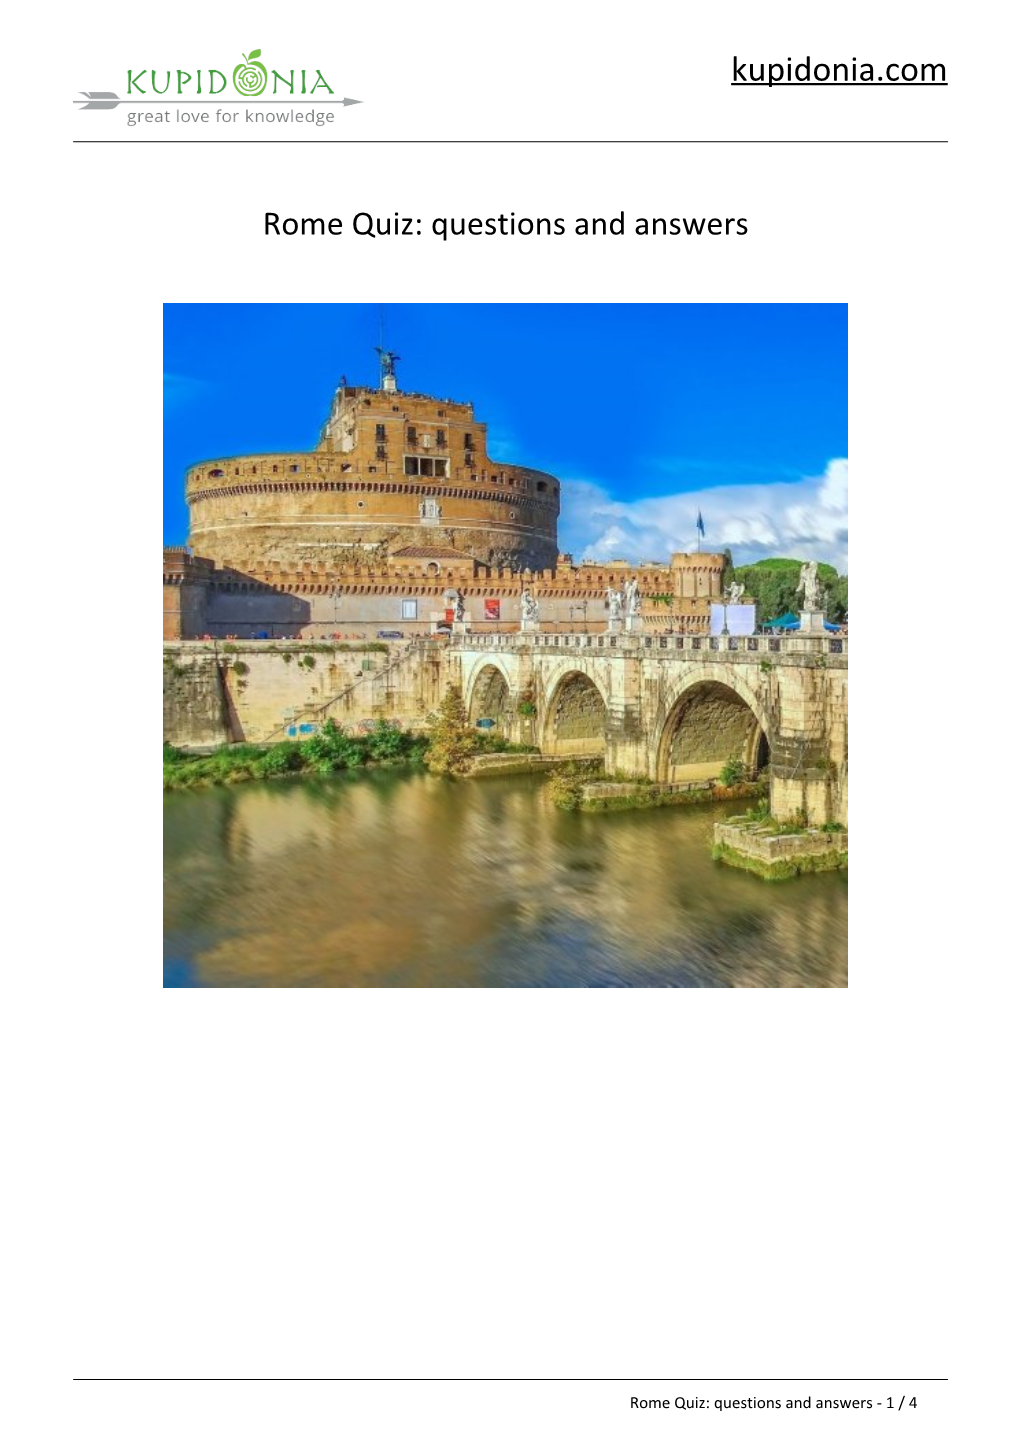 Rome Quiz: Questions and Answers